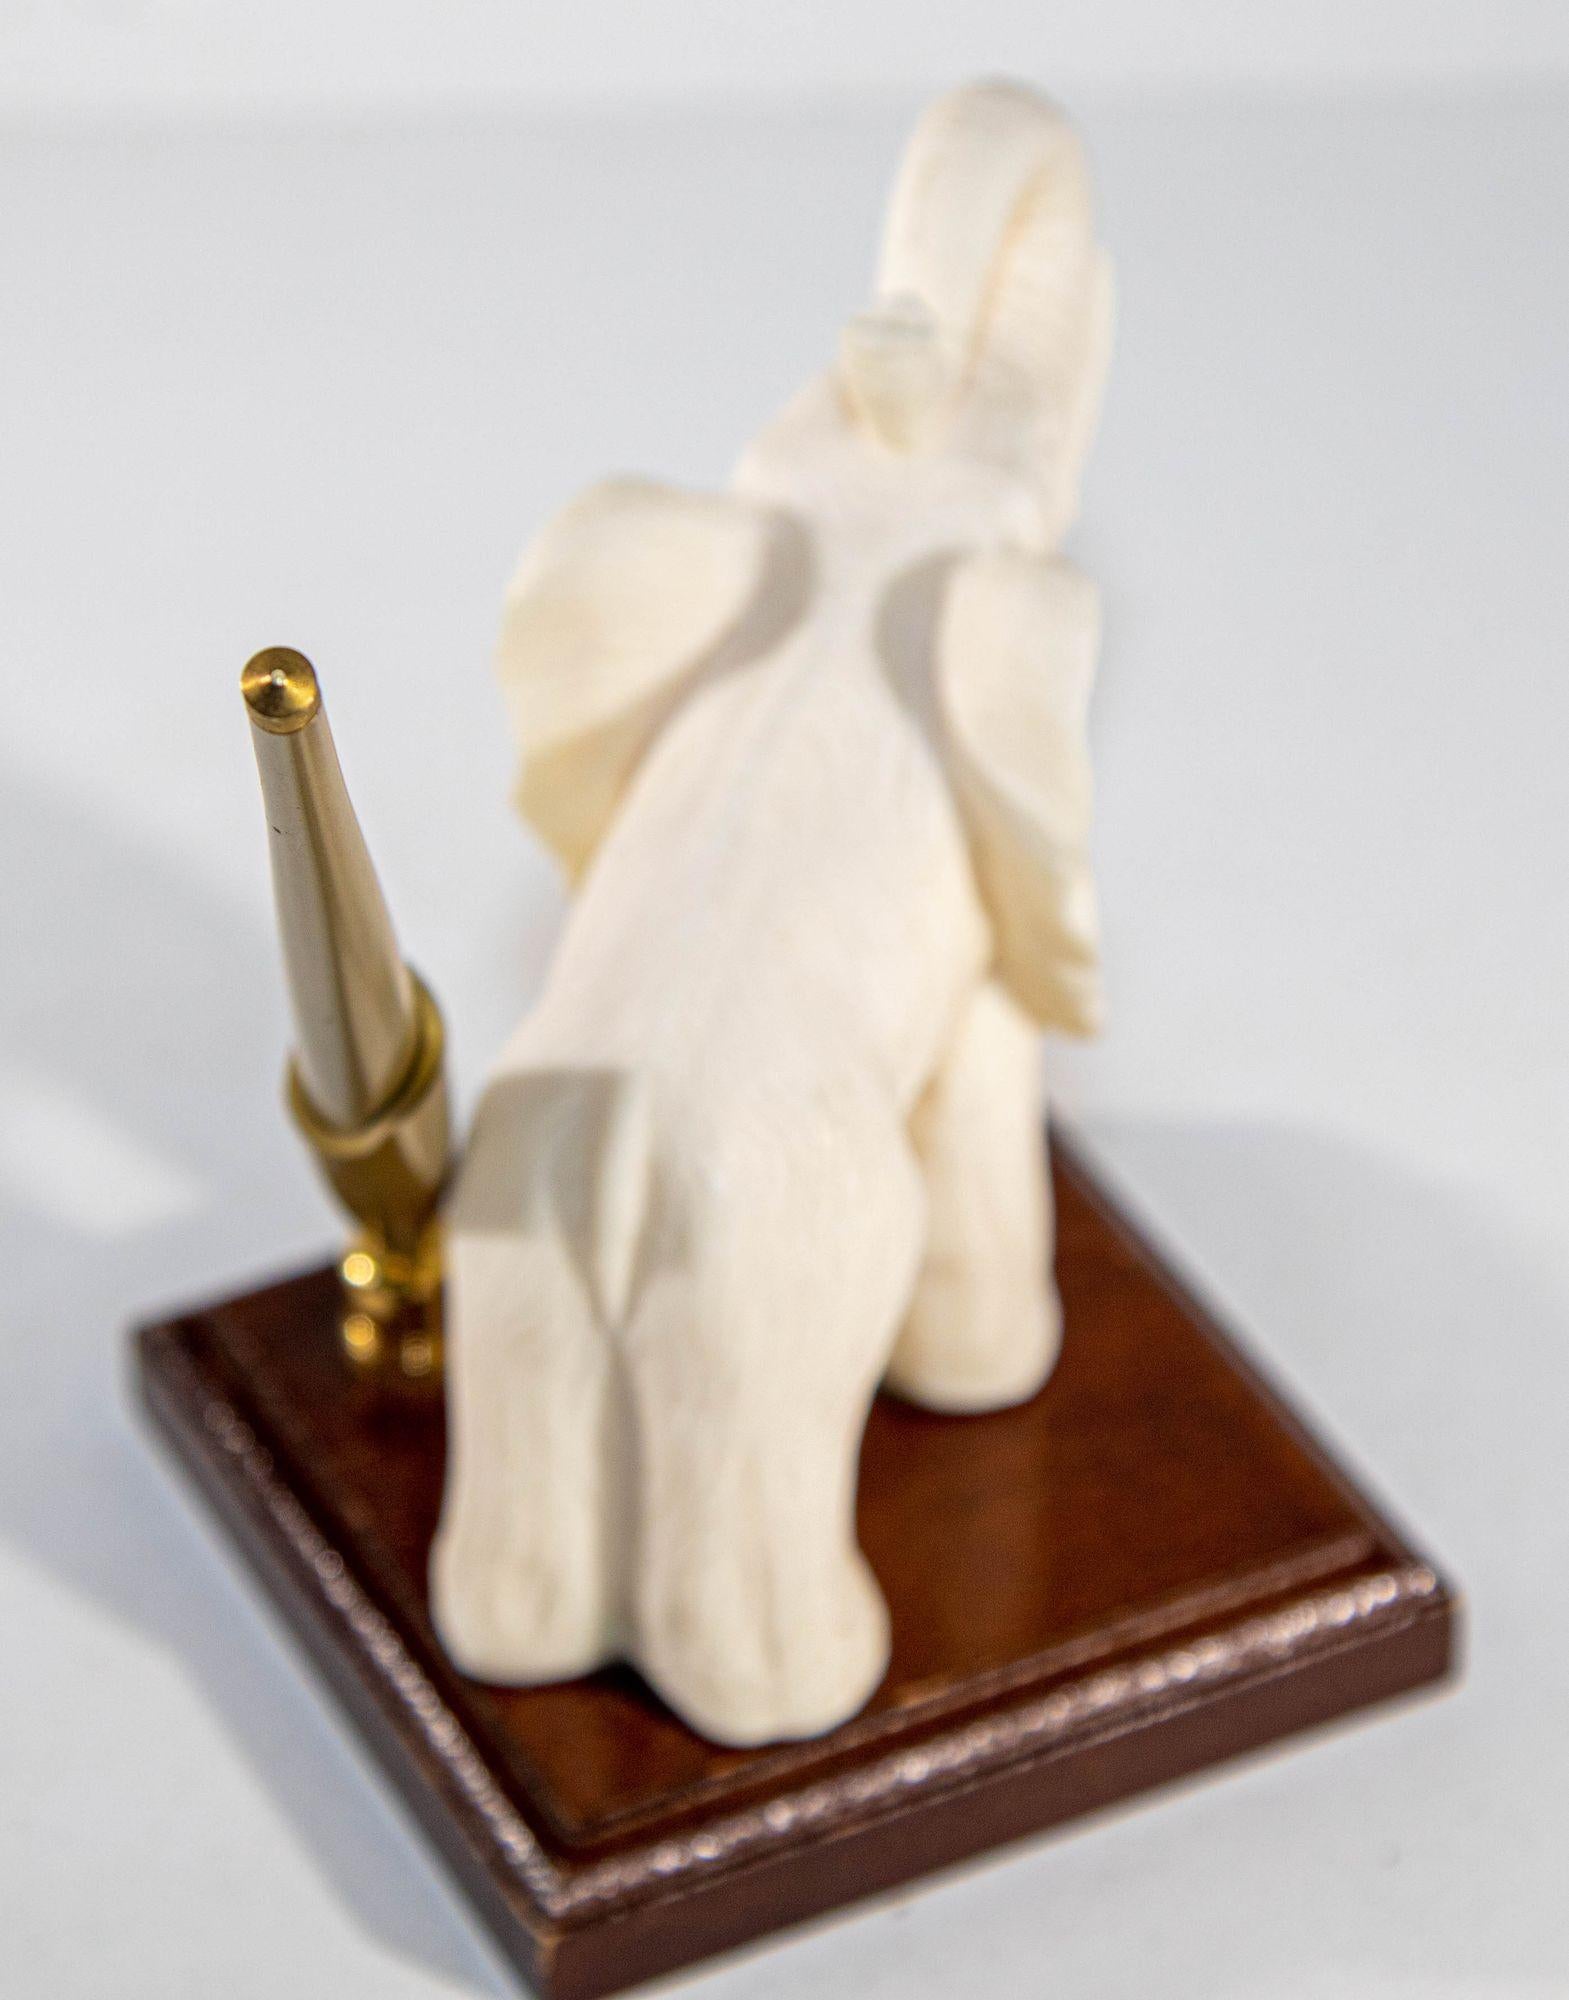 Vintage White Elephant Figurine Pen Holder, Jaipur, Rajasthan India In Good Condition For Sale In North Hollywood, CA